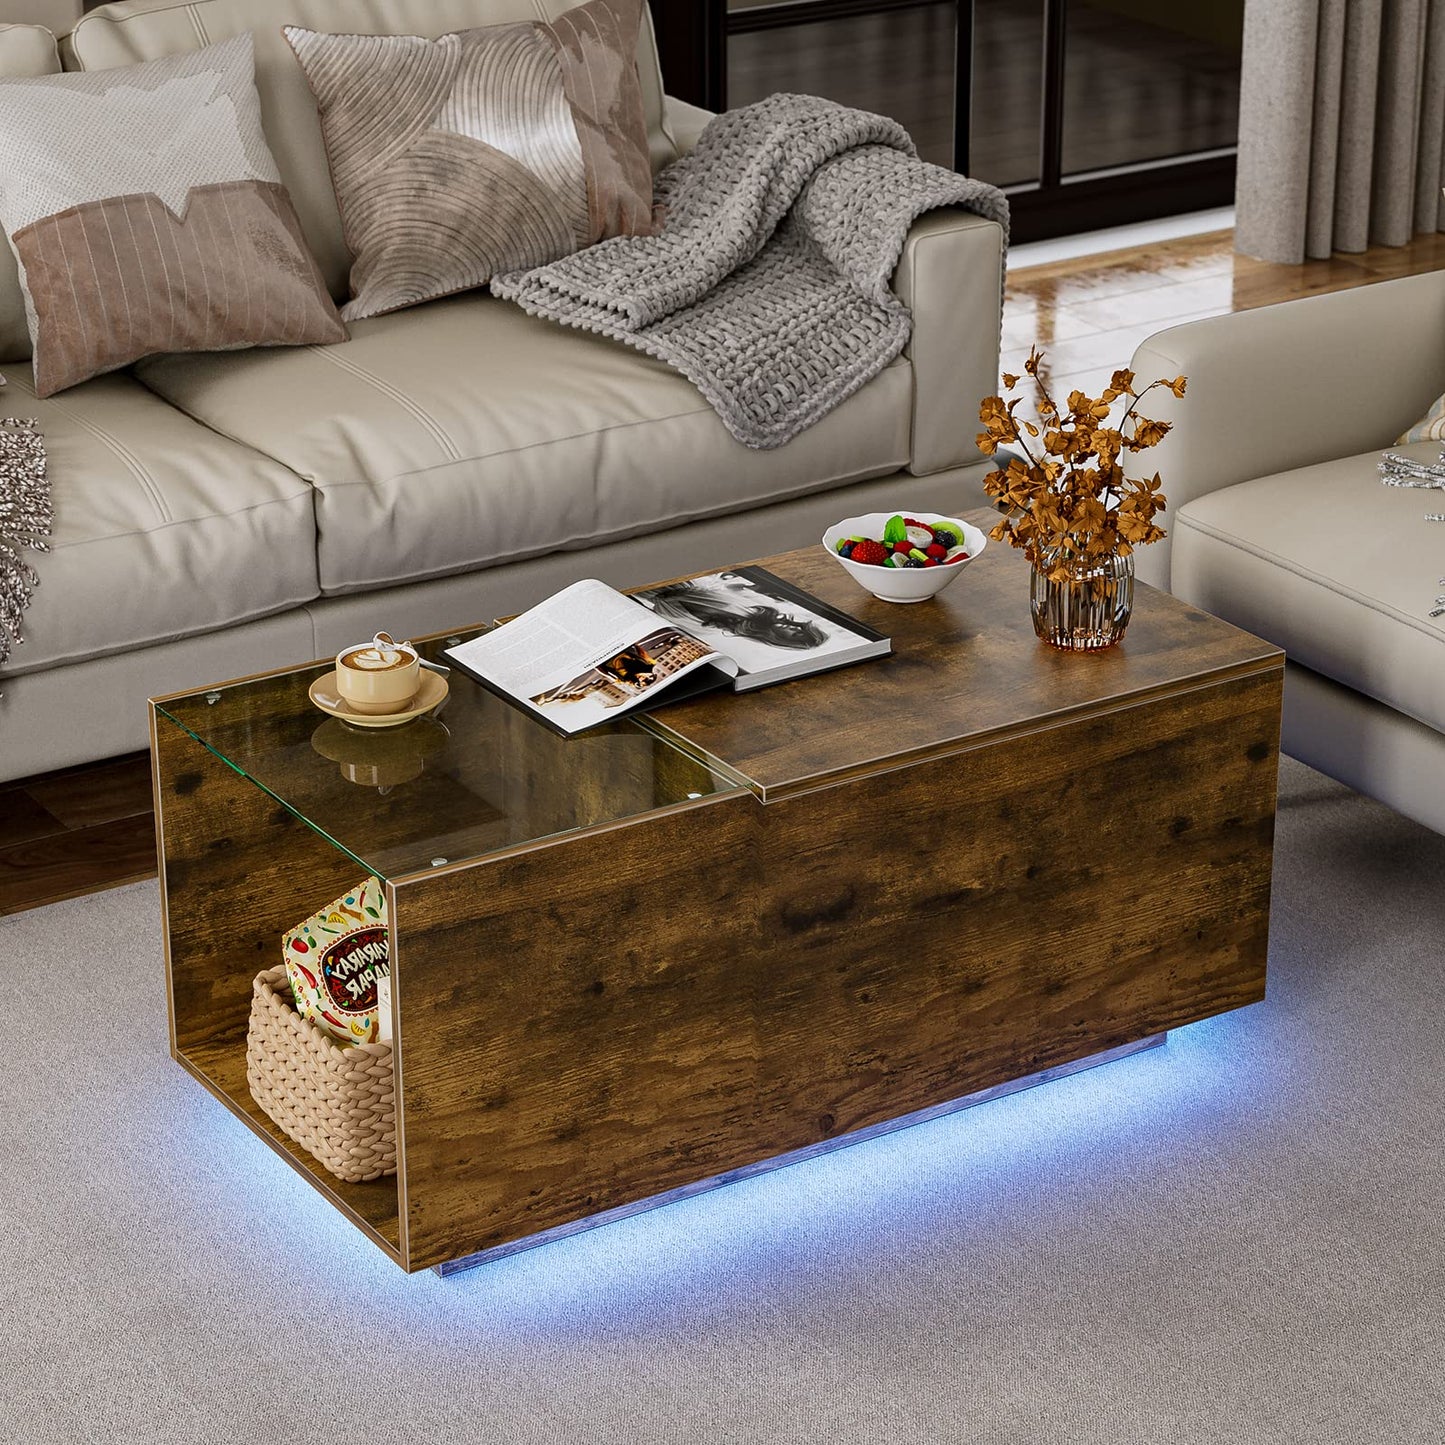 IKIFLY Lift Top Coffee Table with LED Lights & Charging Station, Rustic Brown Lifting Top Central Table with Glass Top Storage and Hidden Compartment for Living Room